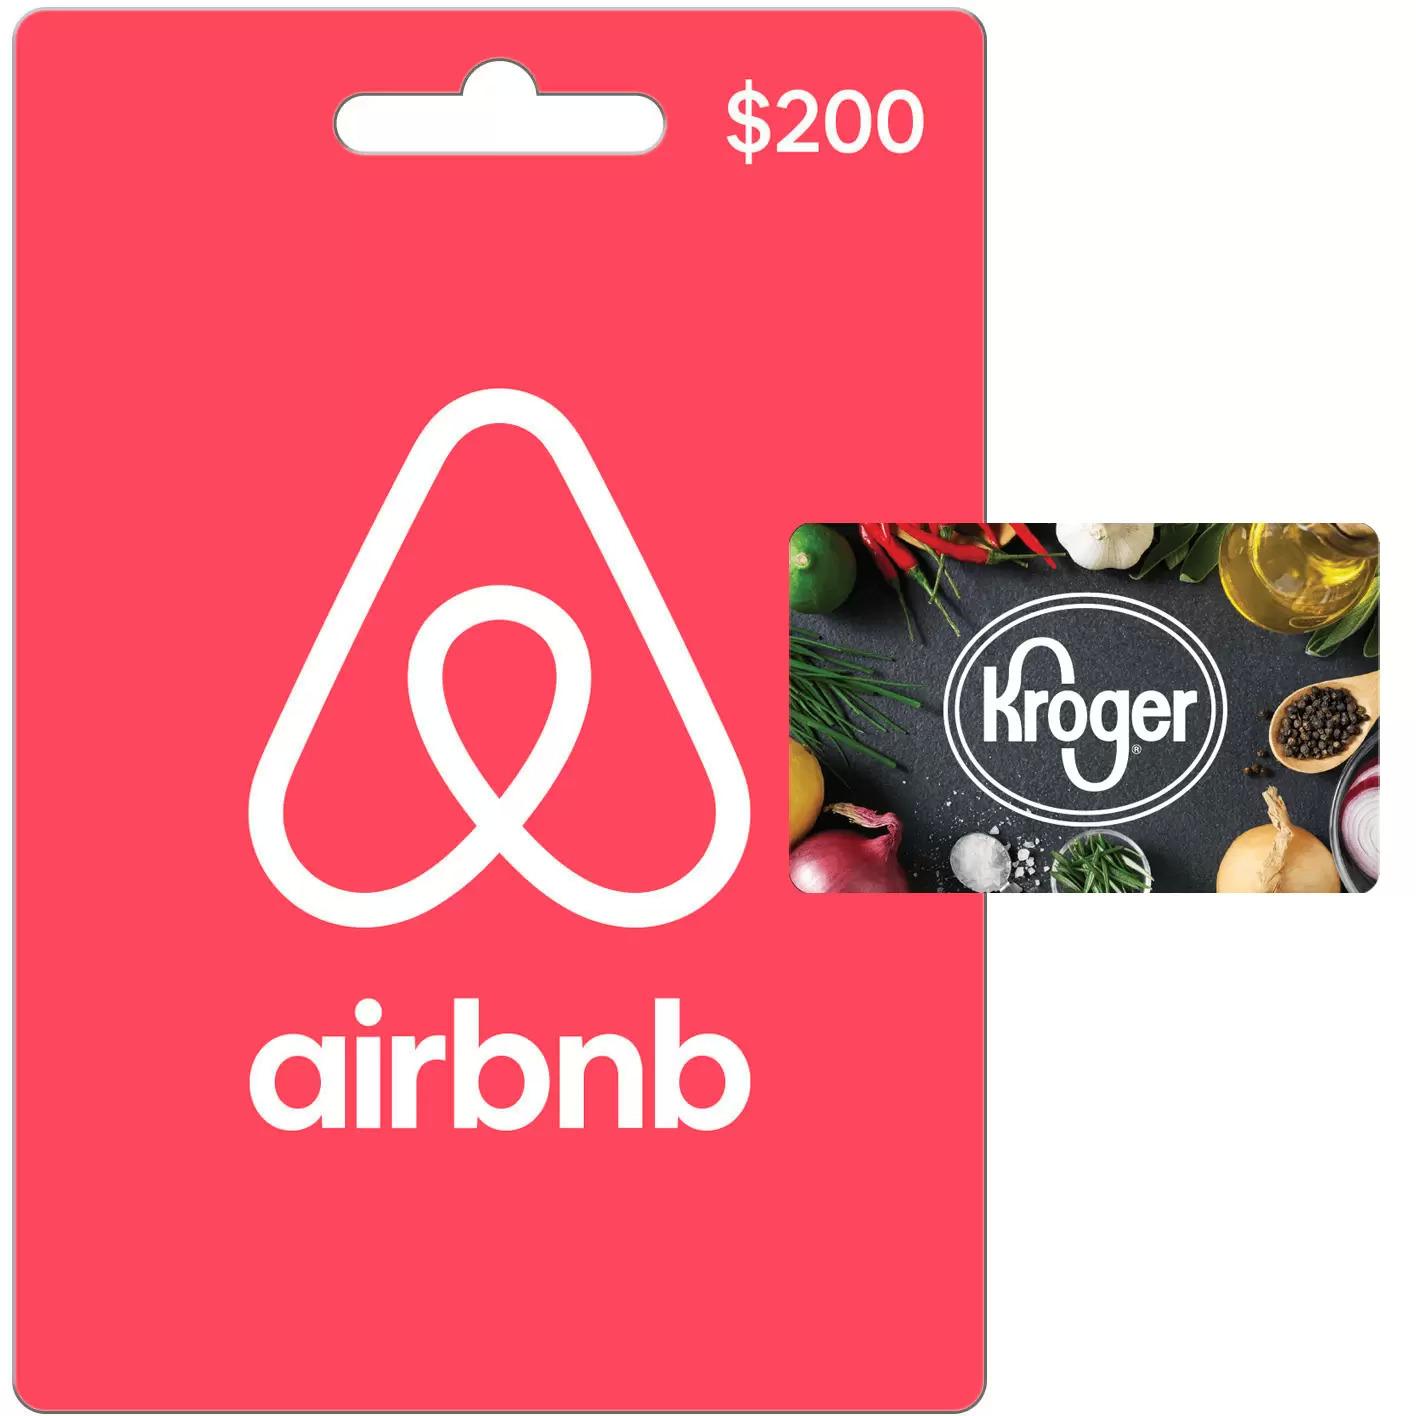 $200 Airbnb Gift Card with a $25 Kroger Gift Card for $200